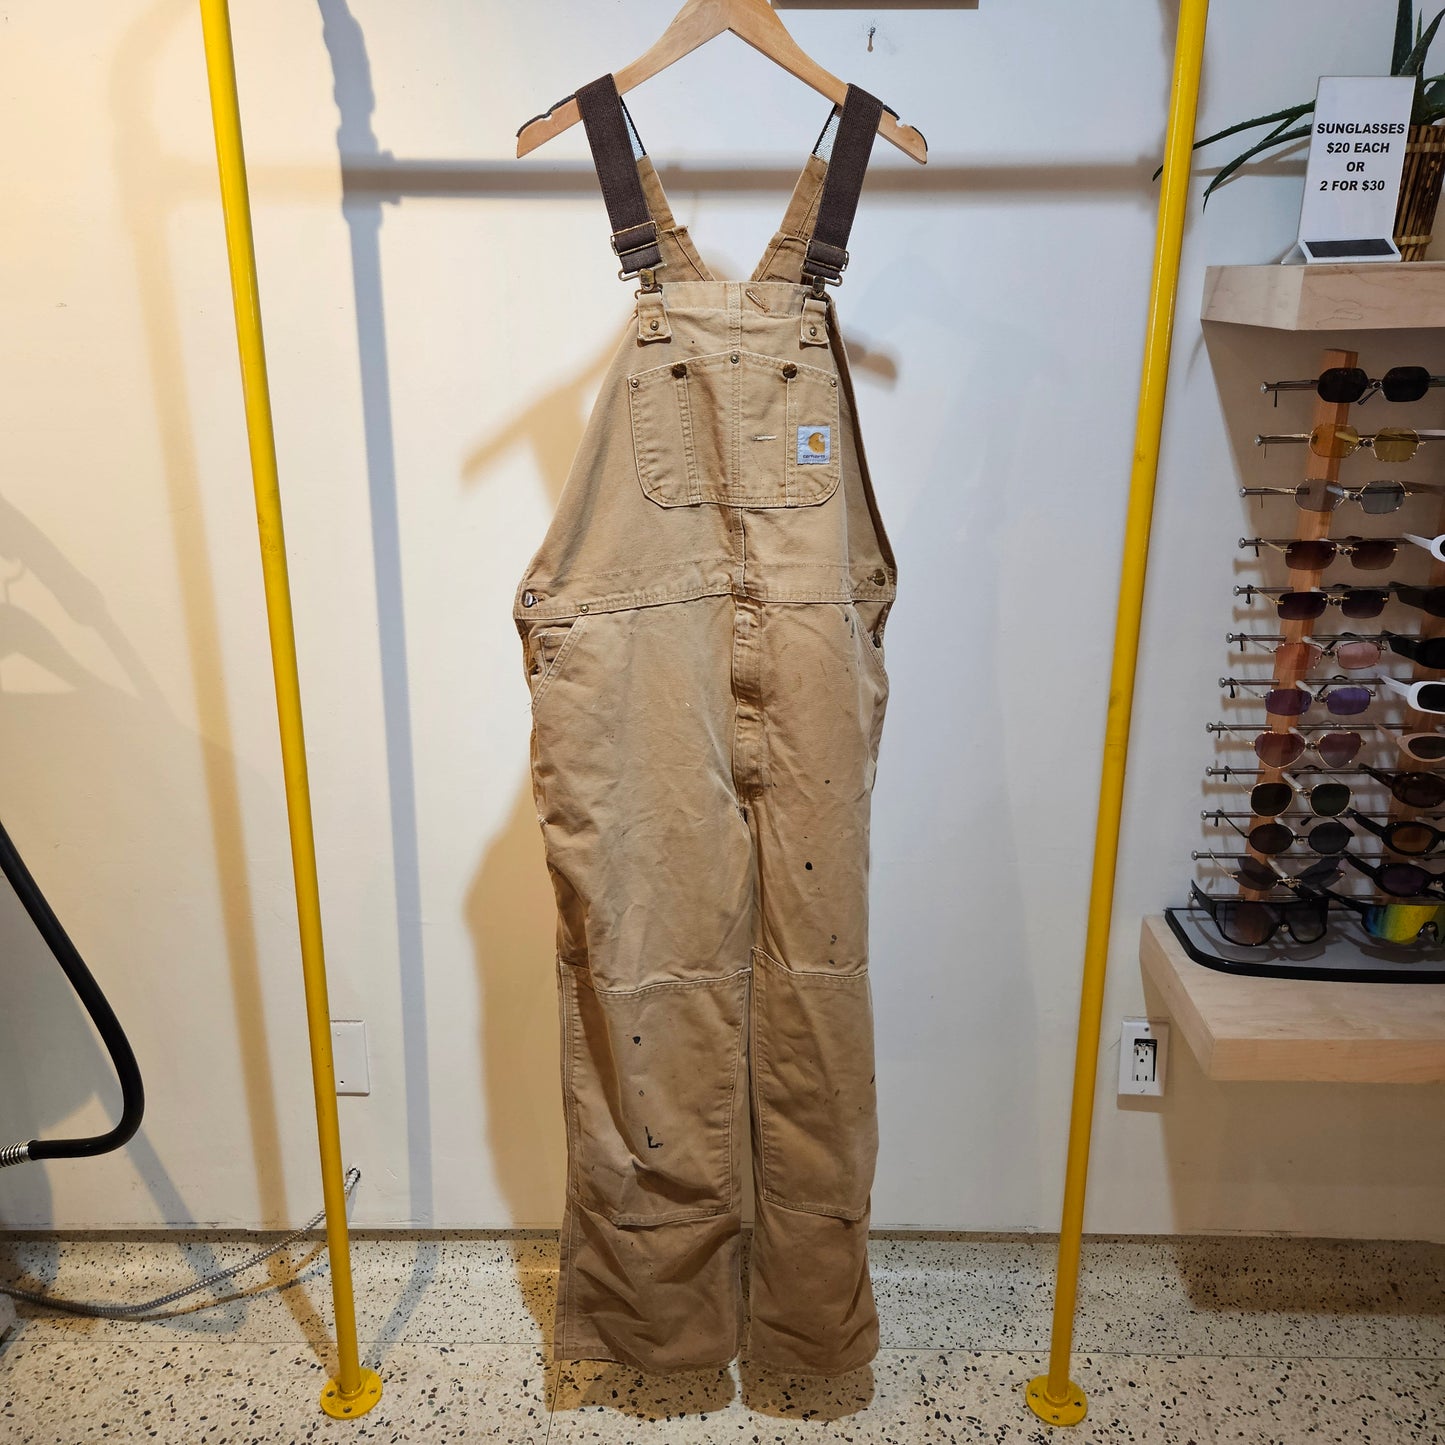 2010s Carharrt Double Knee Overalls Made in USA Size 44x30